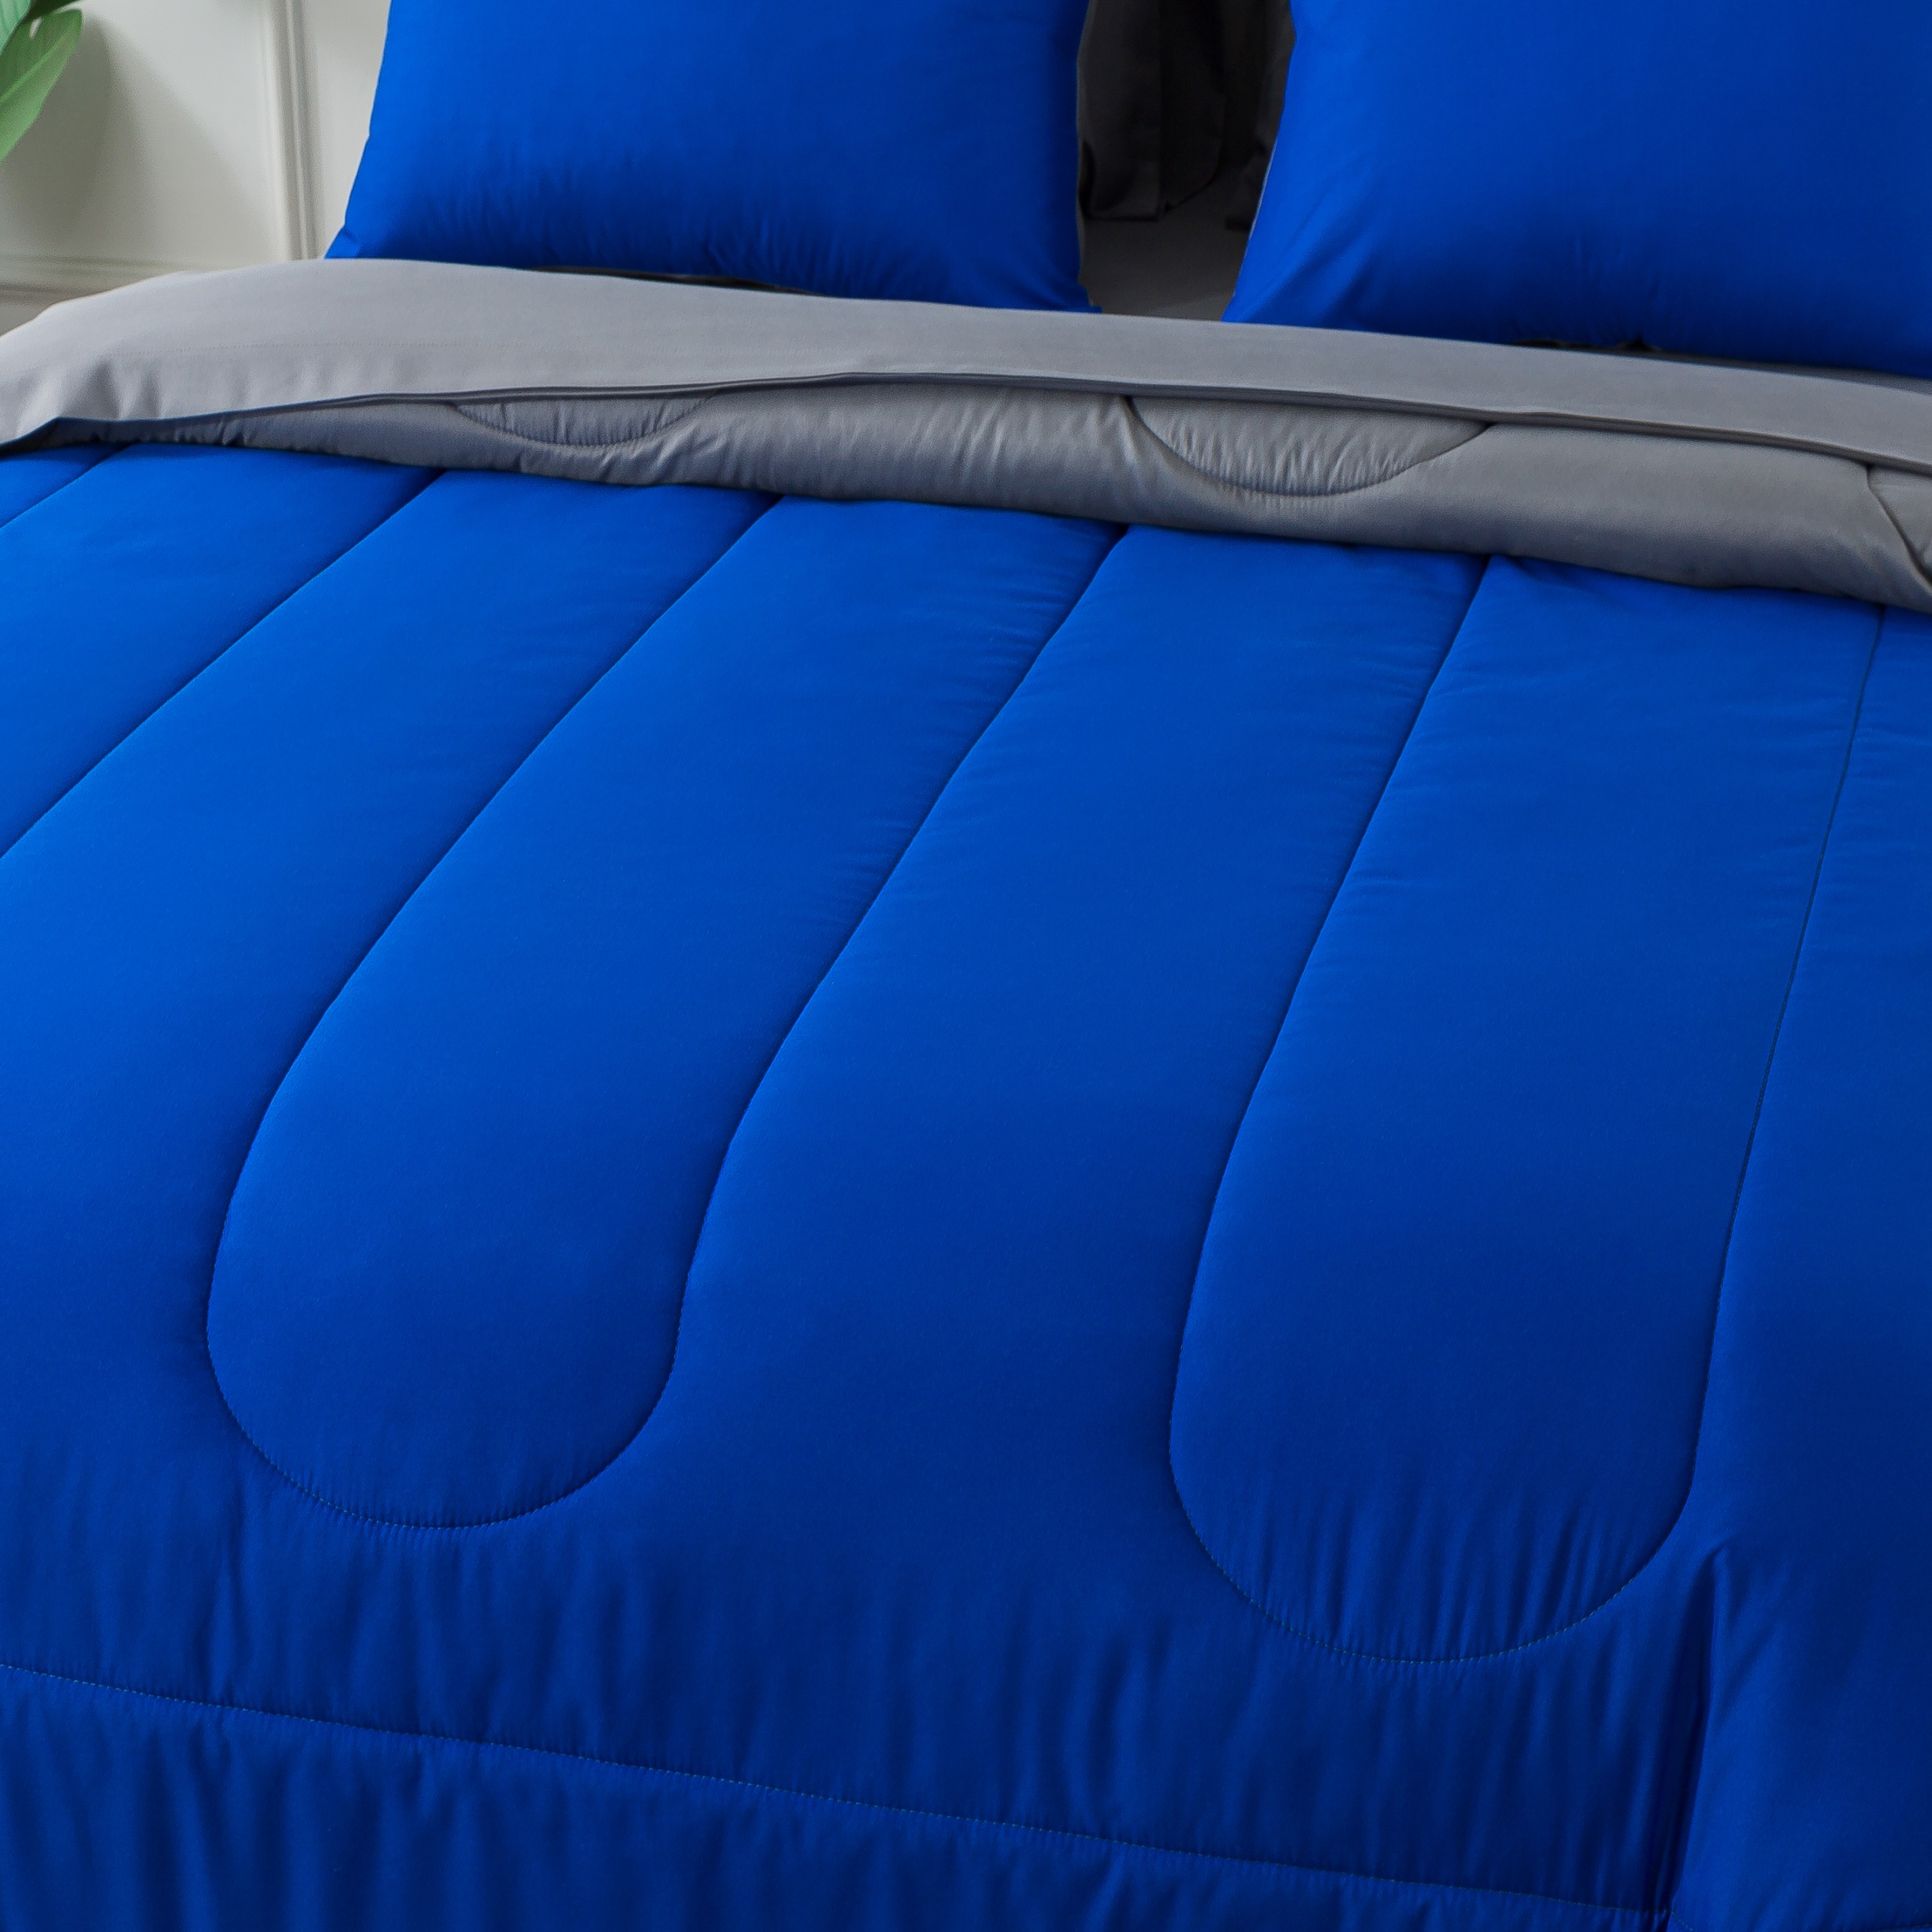 Mainstays Blue Reversible 7-Piece Bed in a Bag Comforter Set with Sheets, Queen - image 4 of 12